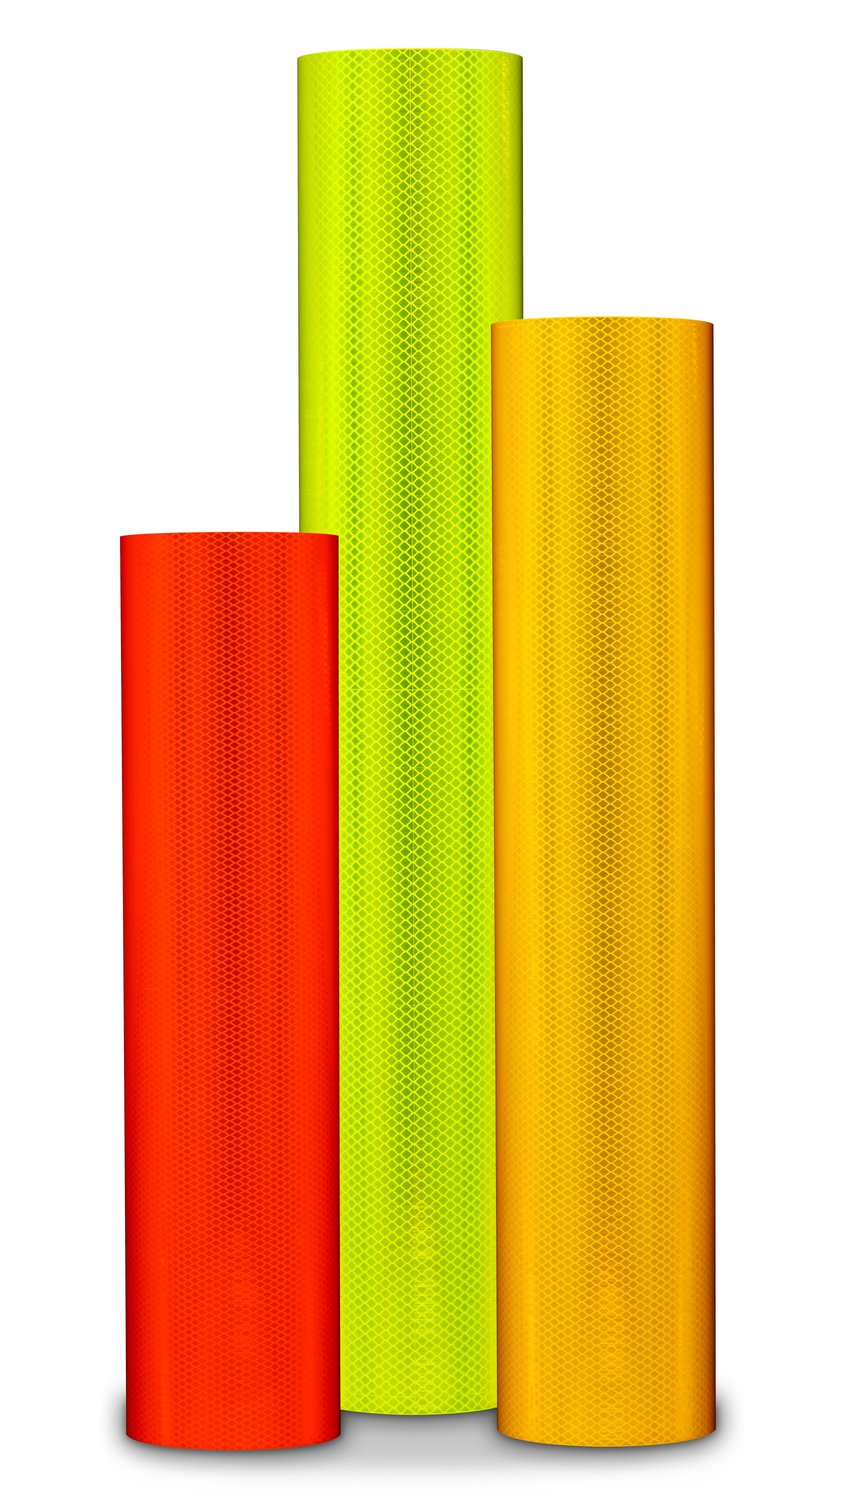 7100152914 - 3M Diamond Grade DG³ Reflective Sheeting 4081, Fluorescent Yellow,
with Lead/Trailer, 18 in x 50 yd